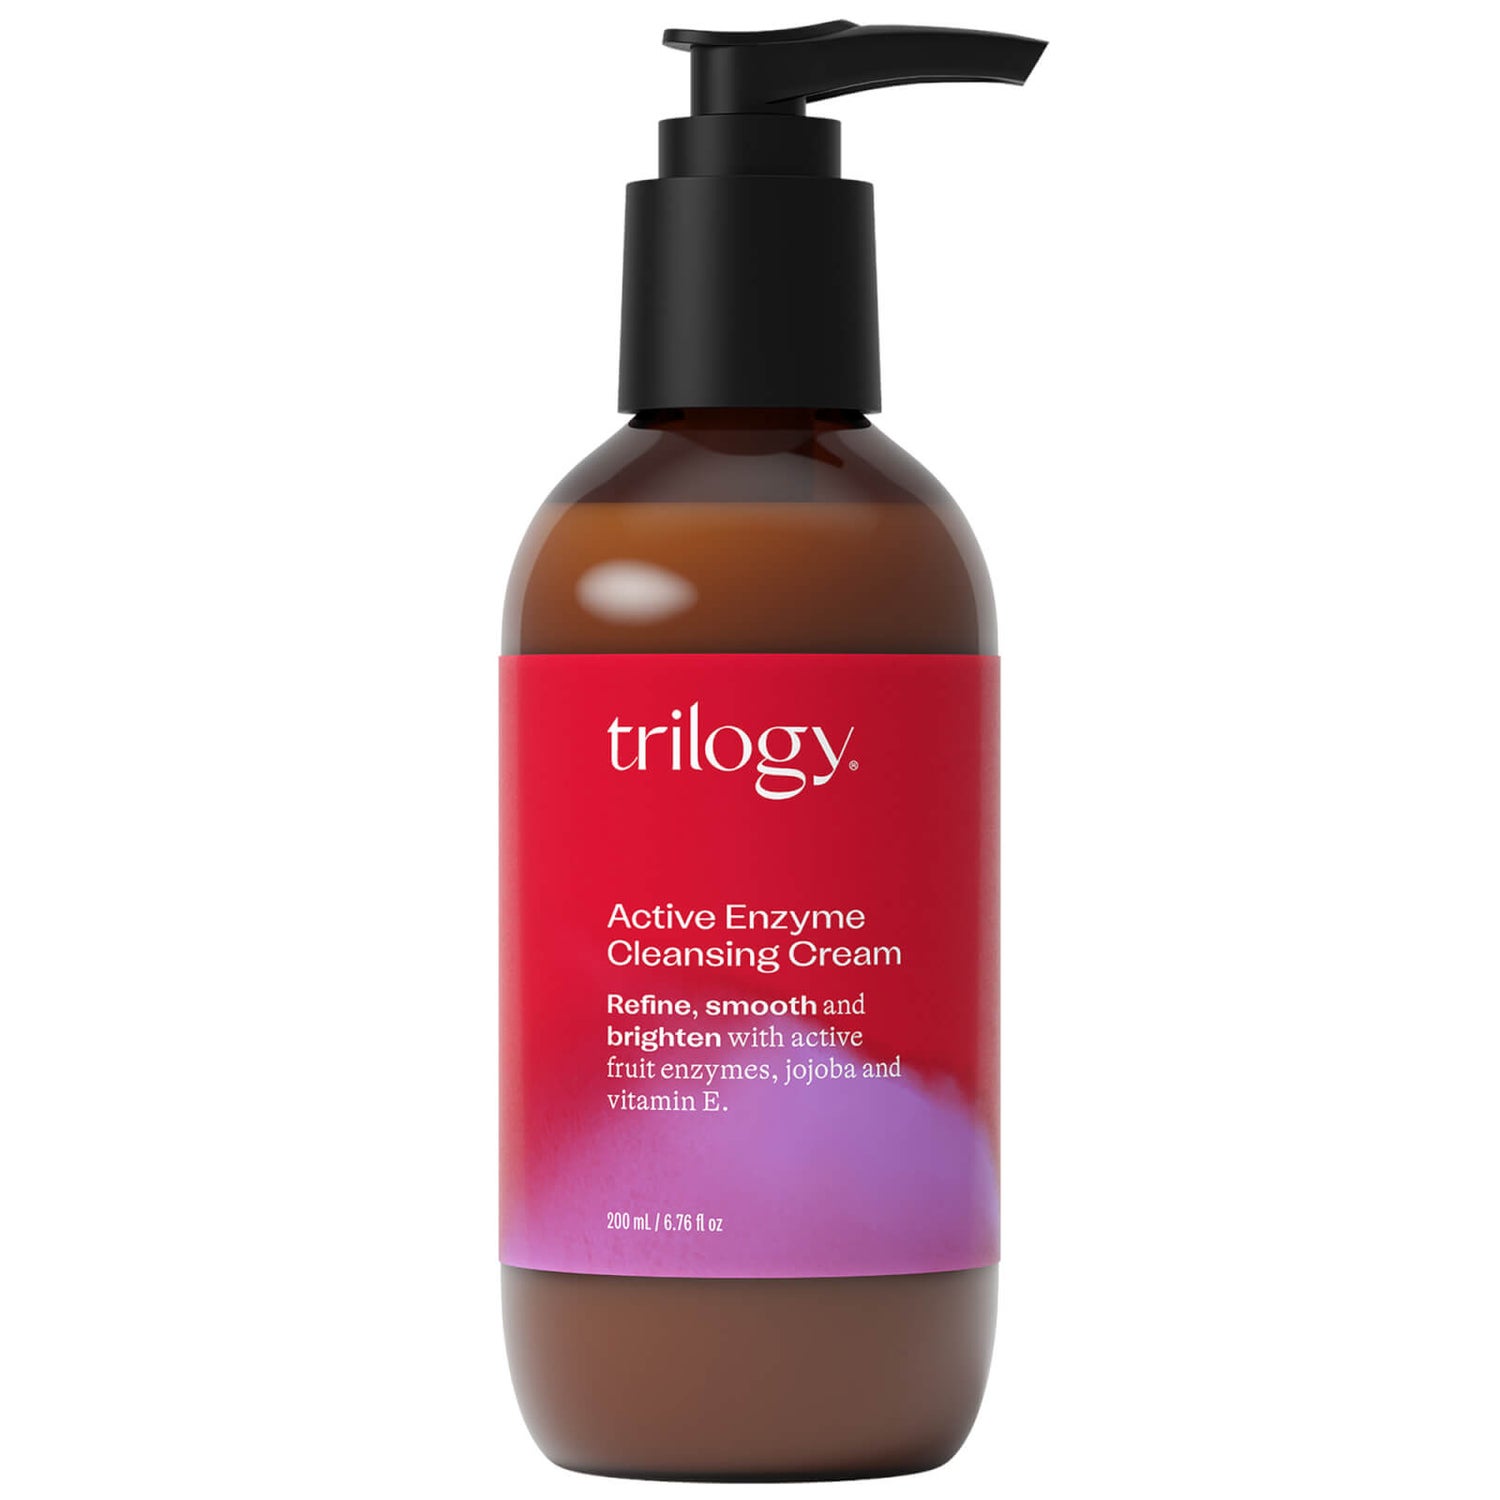 Trilogy Active Enzyme Cleansing Cream 7 oz